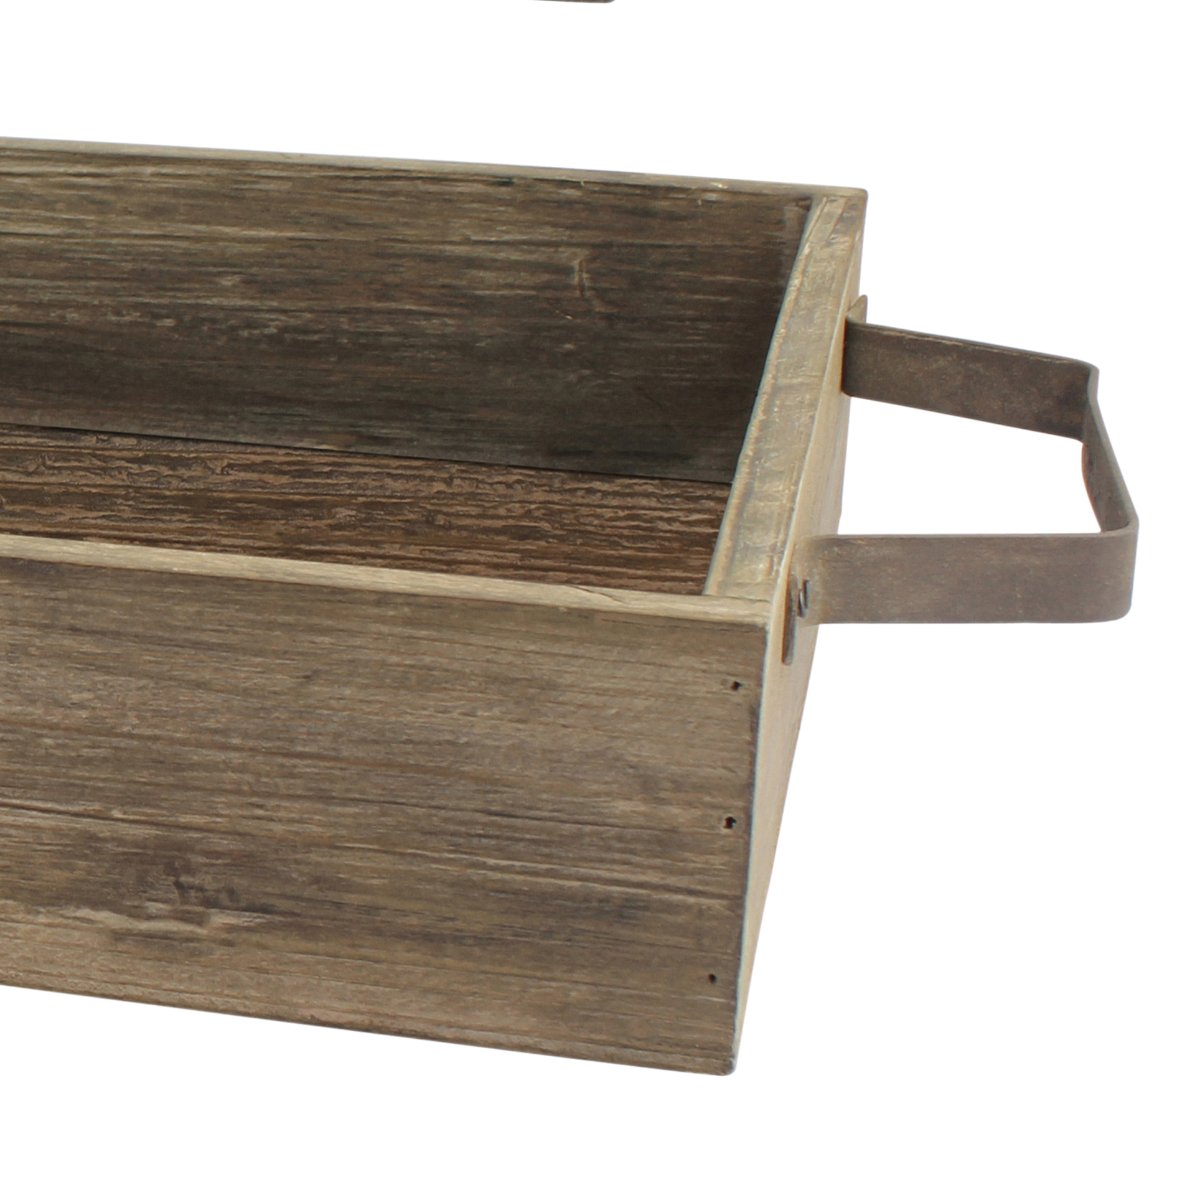 Stonebriar Nesting Wooden Rectangle Serving Tray Set with Metal Handles, Rustic Brown Wood Butler Trays, For Serving Food and Drink, a Unique Coffee Table Centerpiece, or Desk Organizer for Documents